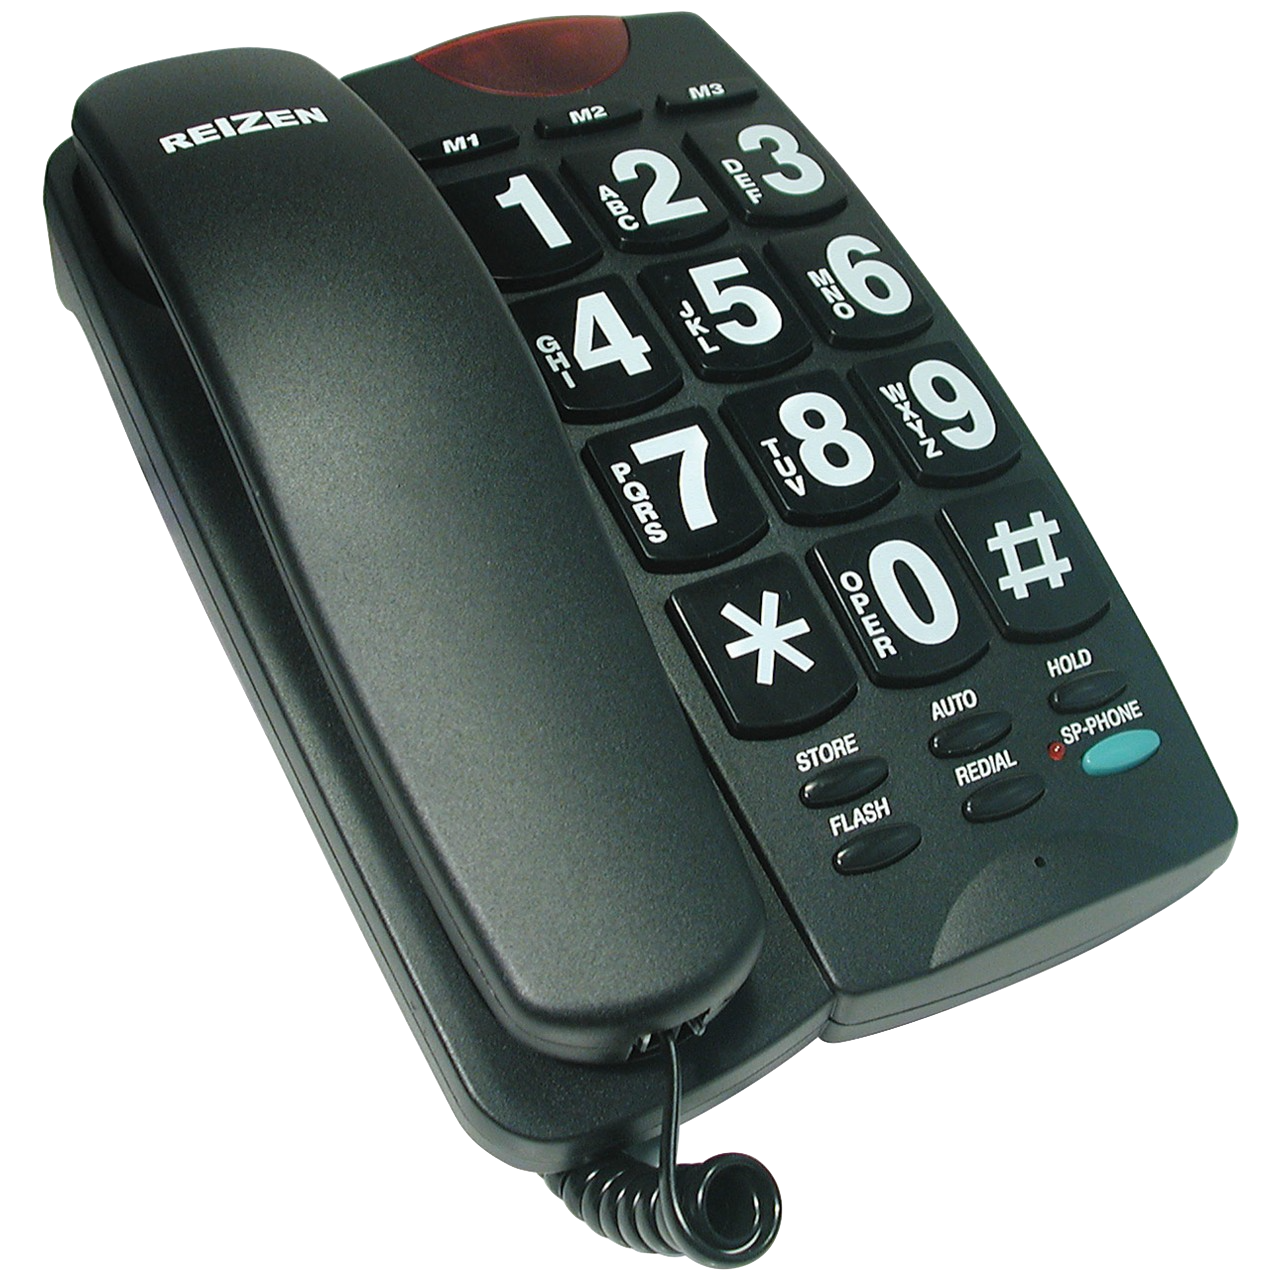 phone with big buttons and numbers